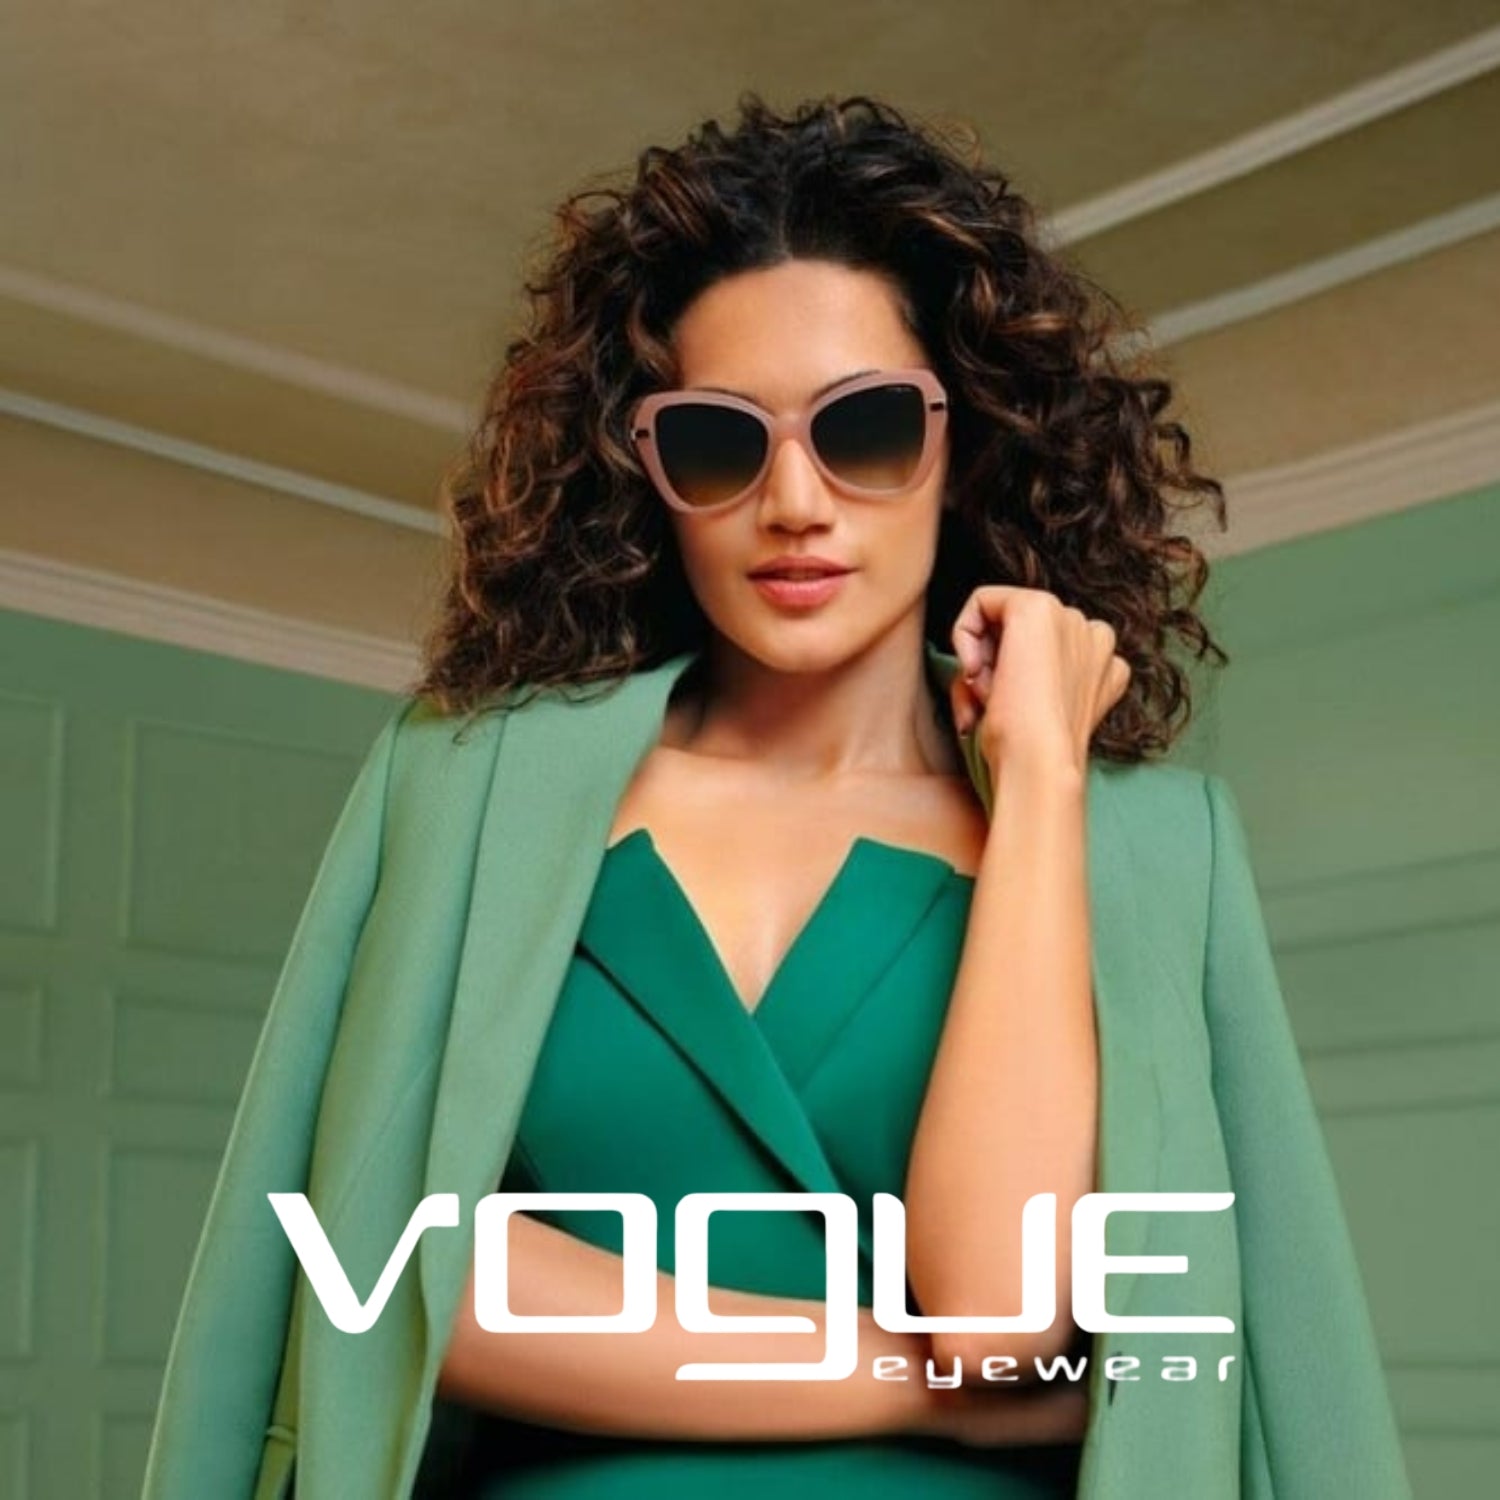 "Discover the latest Vogue Eyewear Spring/Summer 2019 collection of sunglasses at Optorium."